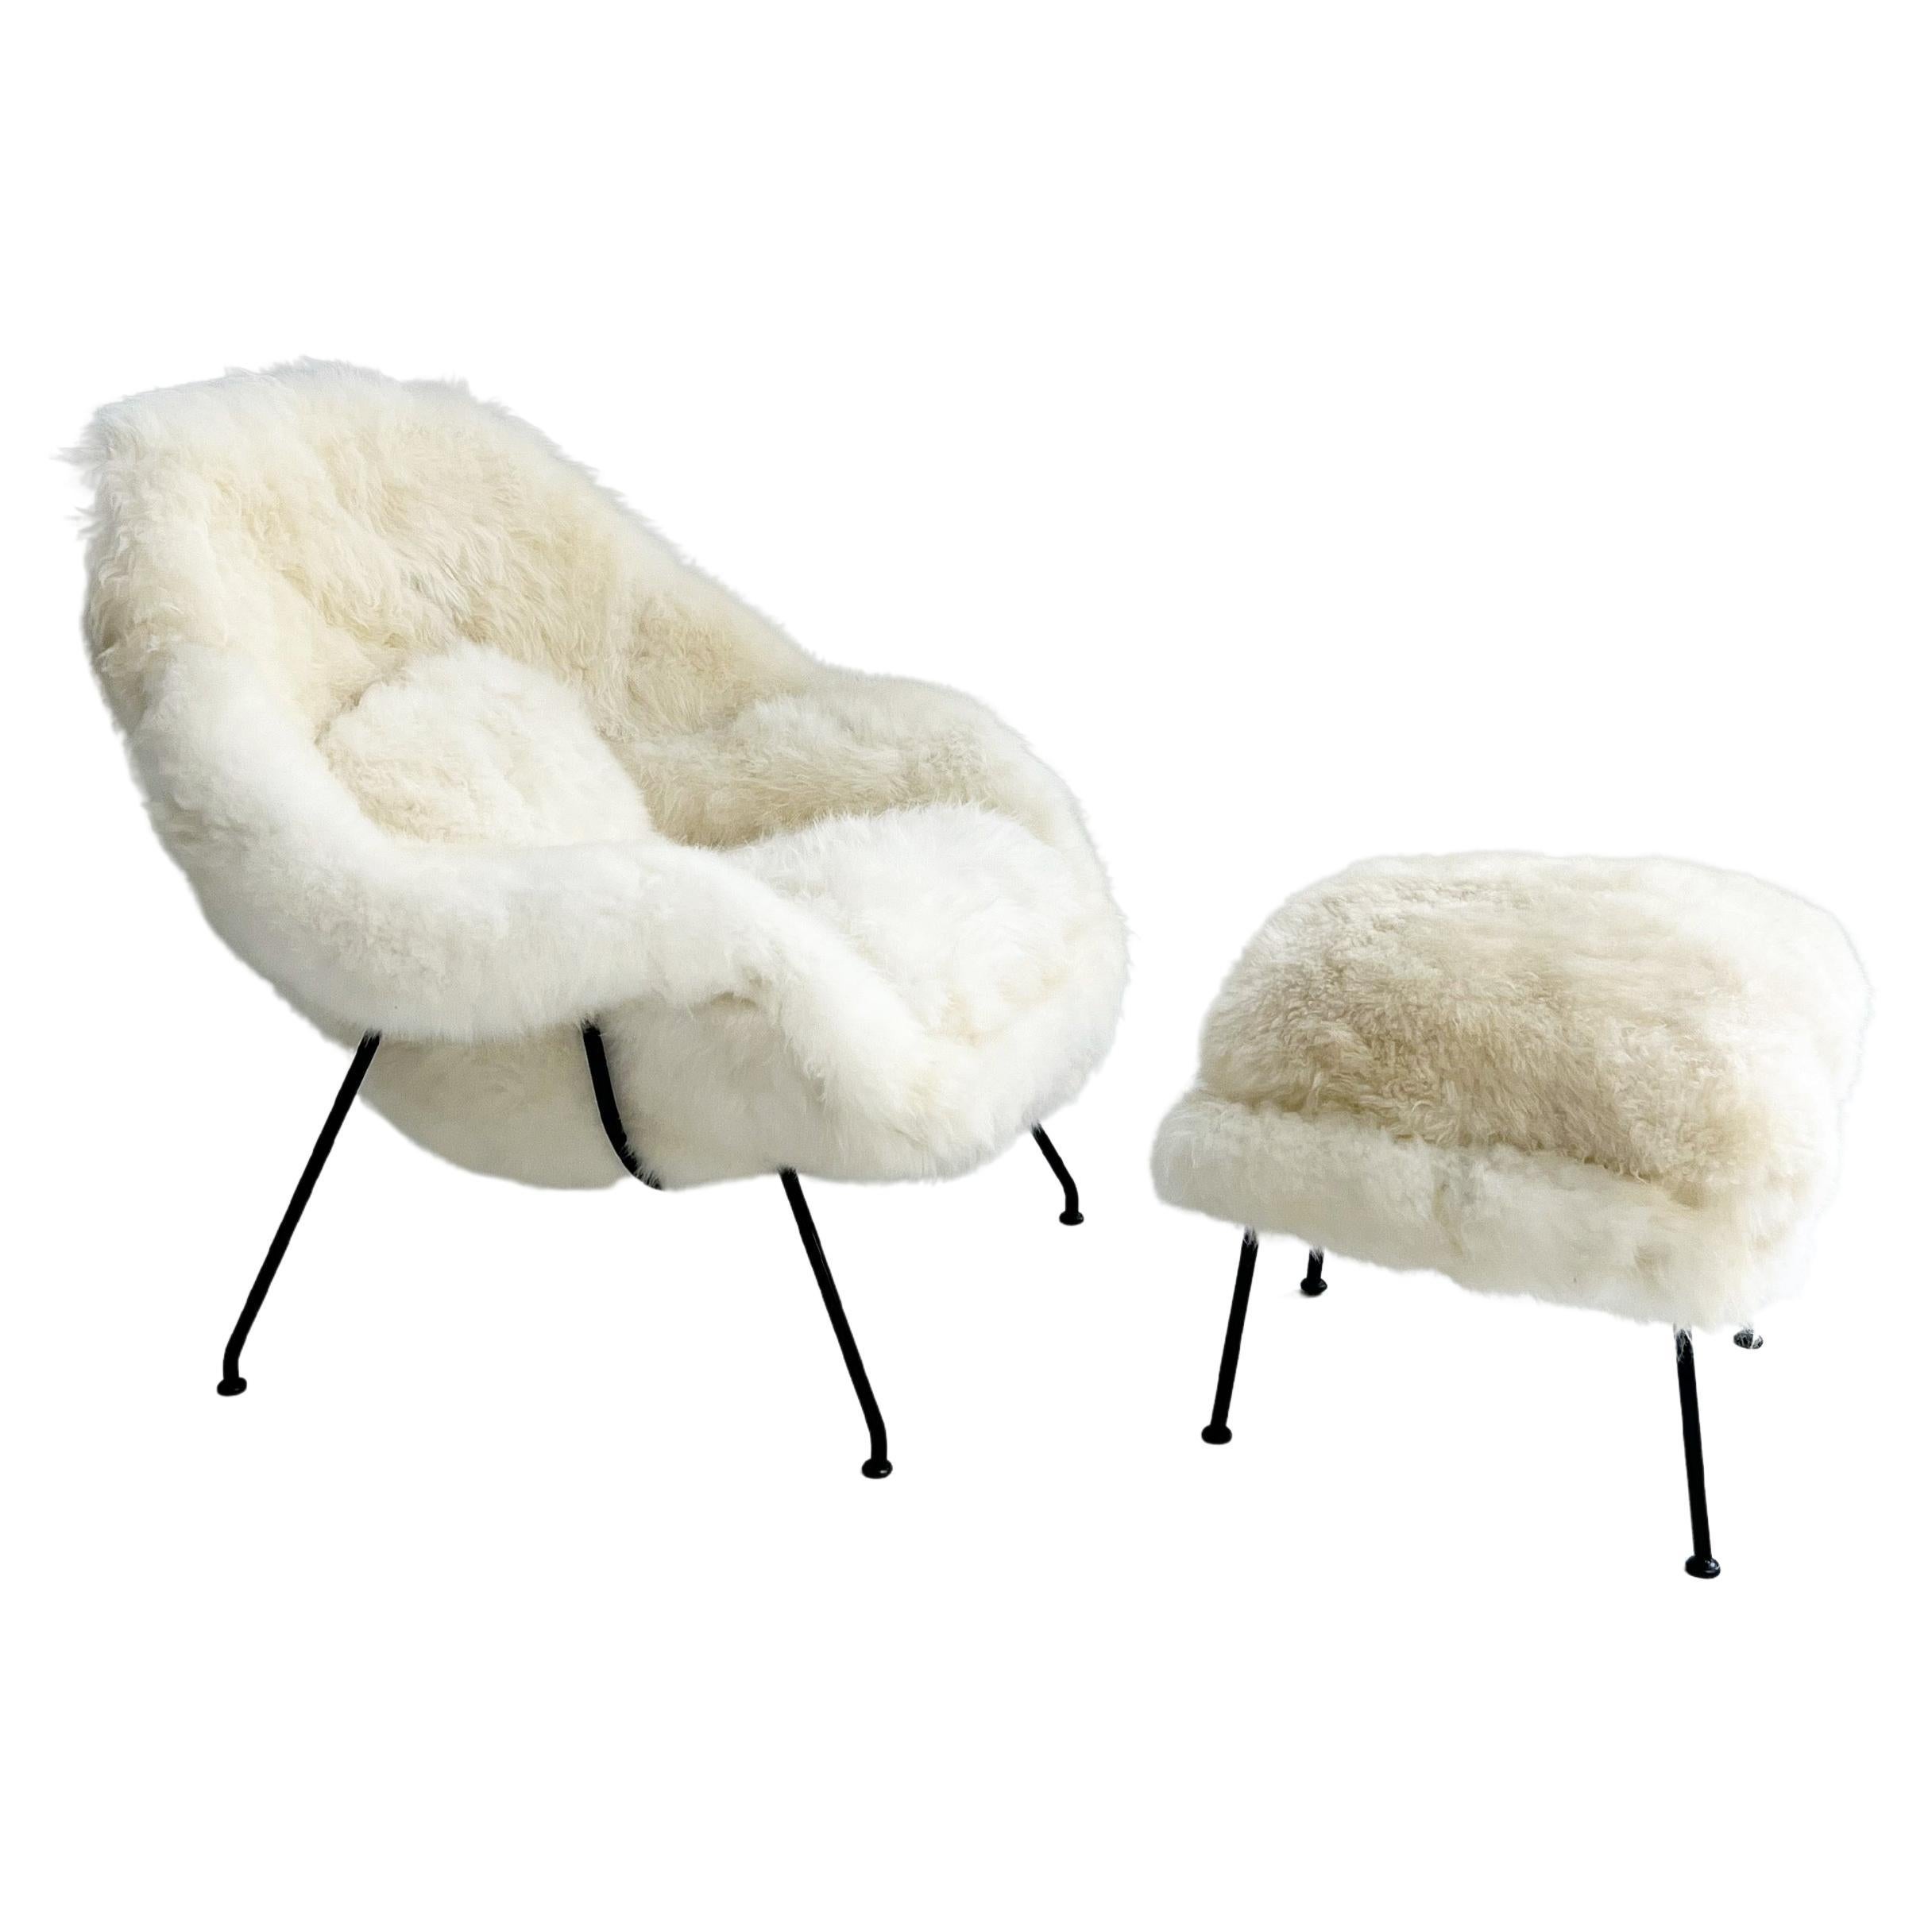 Forsyth Bespoke Eero Saarinen Womb Chair and Ottoman in Natural Cashmere For Sale